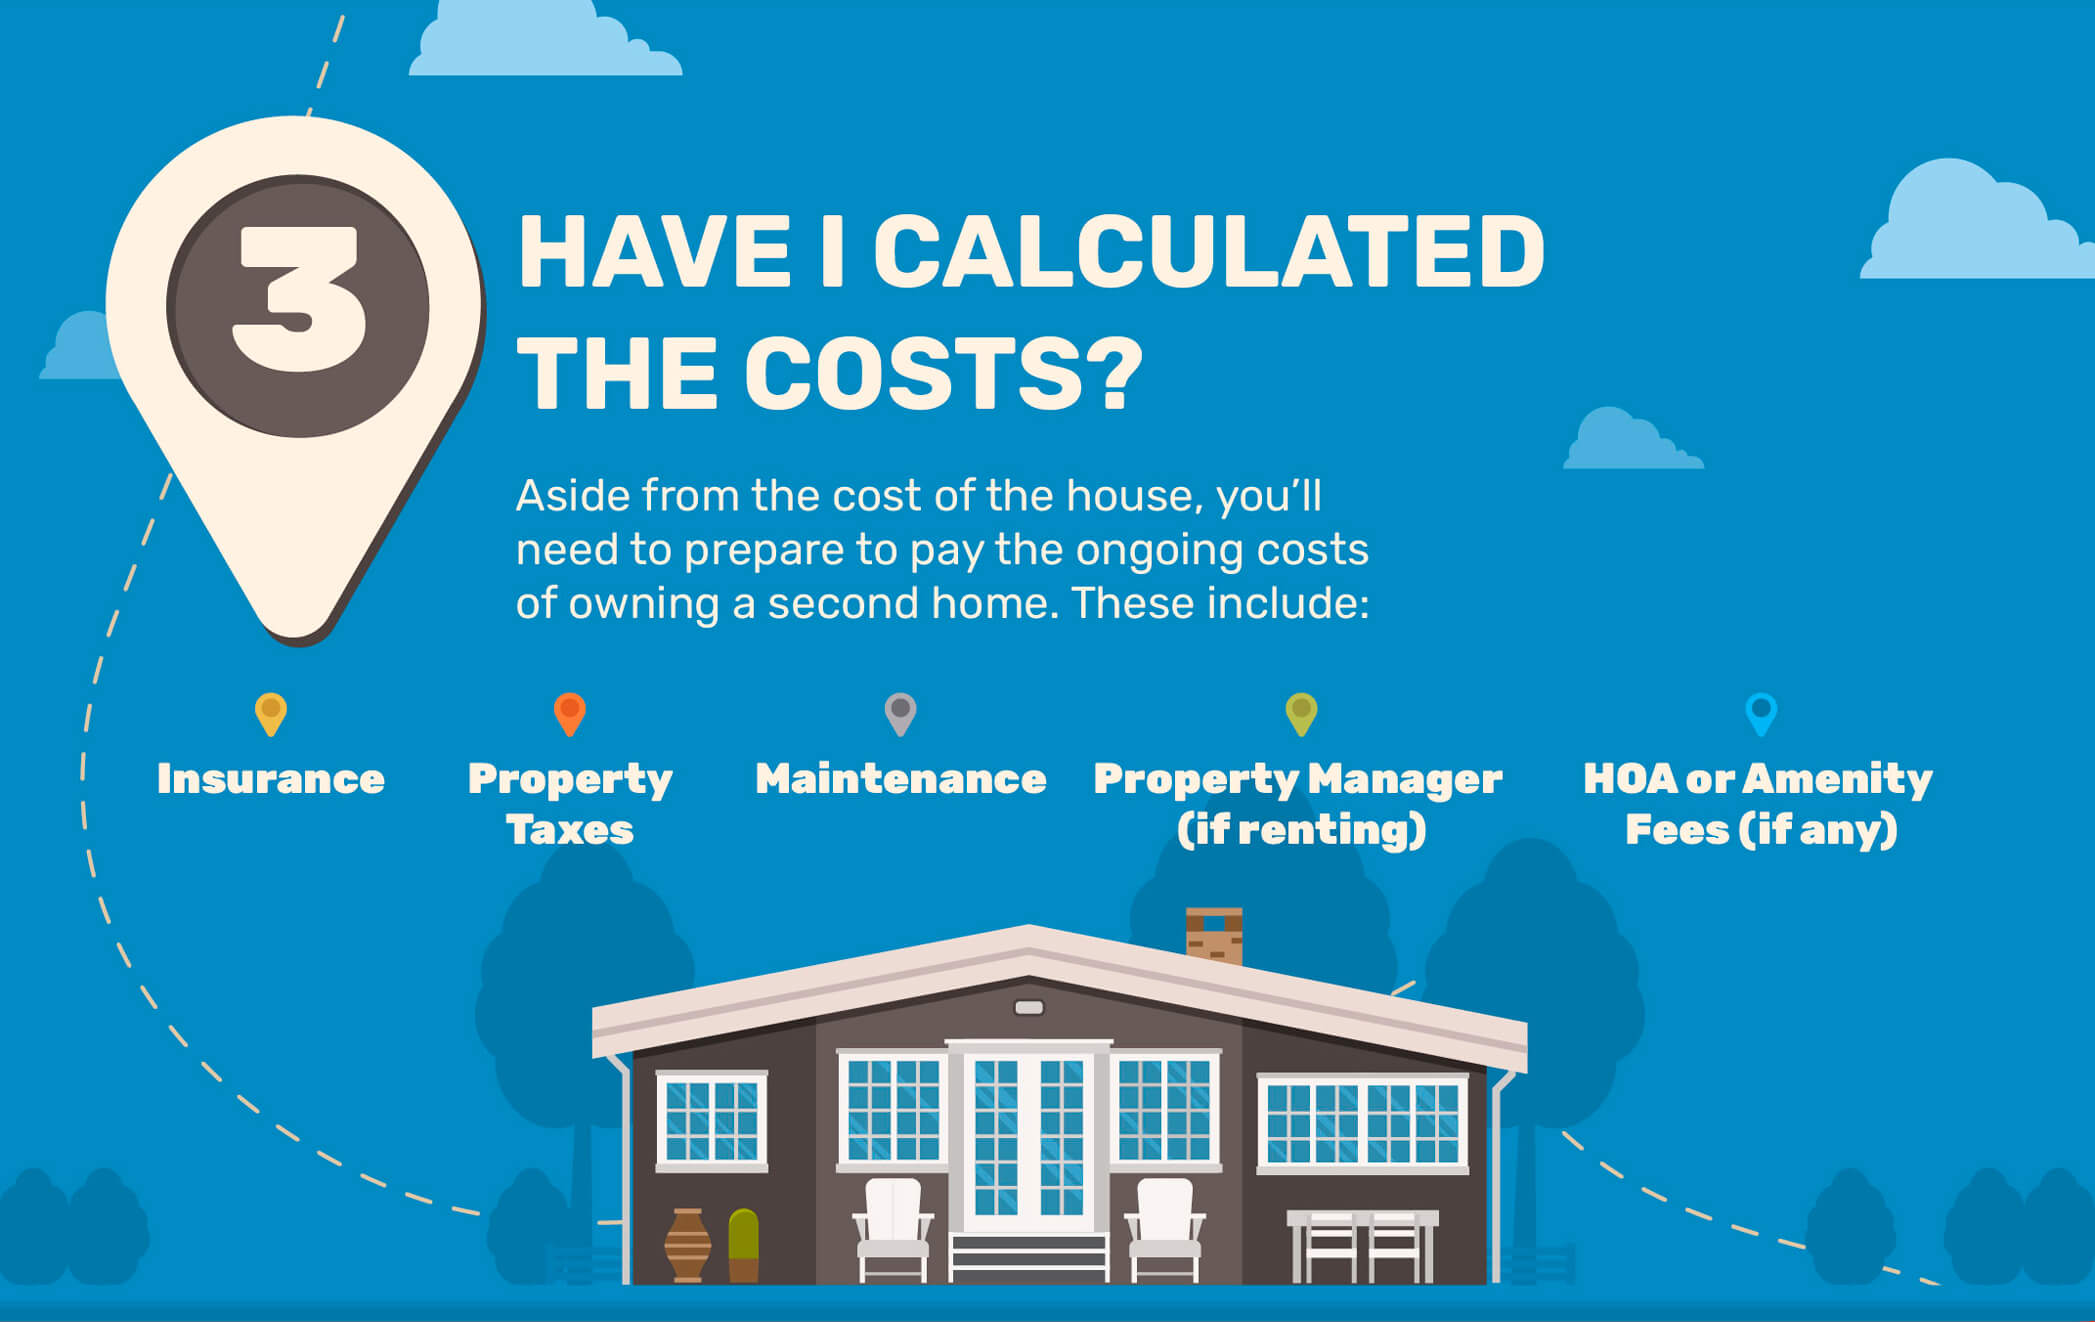 3. Have I Calculated the Costs? Aside from the cost of the house, you’ll need to prepare to pay the ongoing costs of owning a second home. These include: Insurance, property taxes, maintenance, property manager (if renting), and HOA or Amenity Fees (if any).